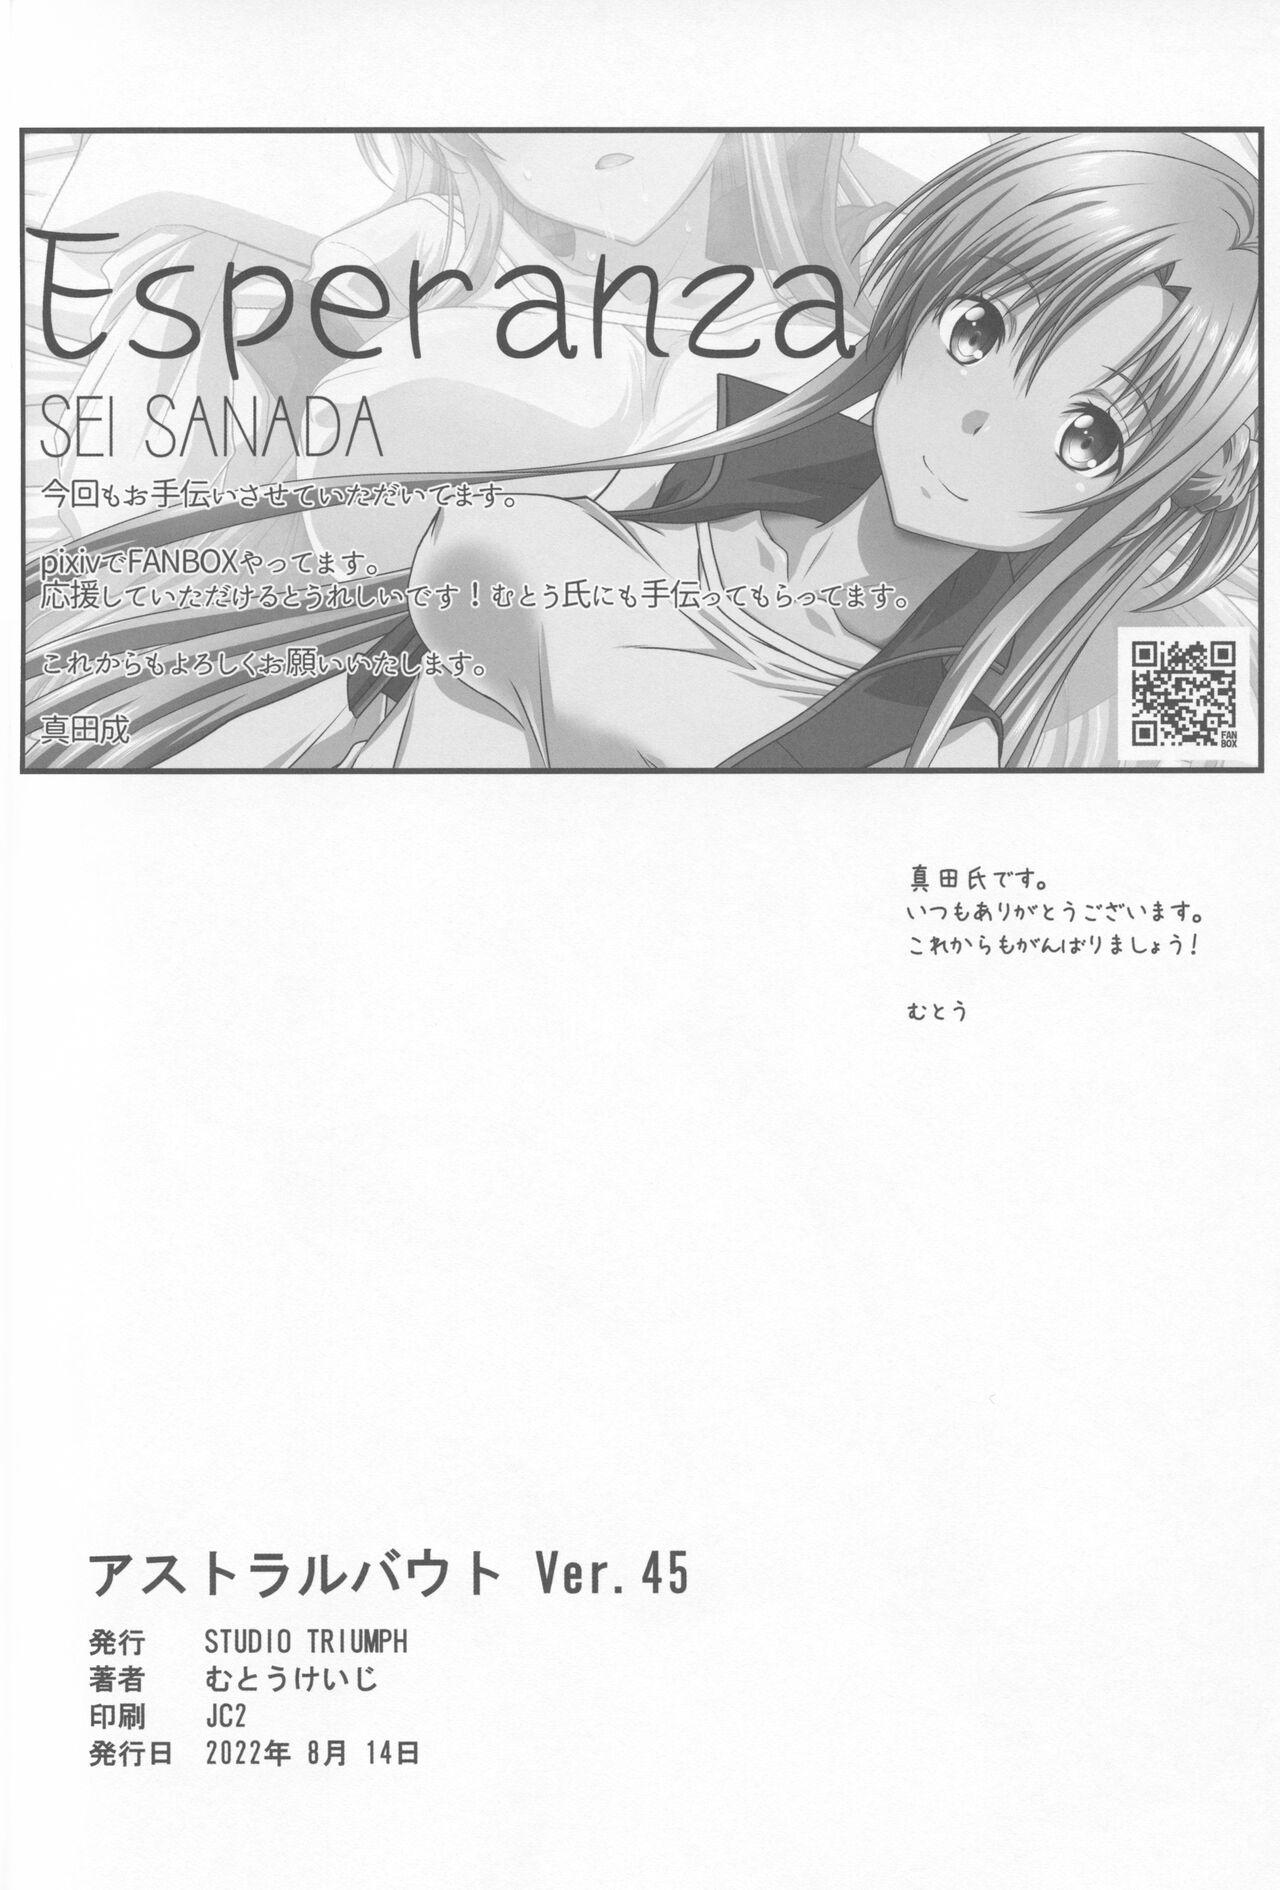 Shy Astral Bout Ver. 45 - Sword art online Blond - Page 25